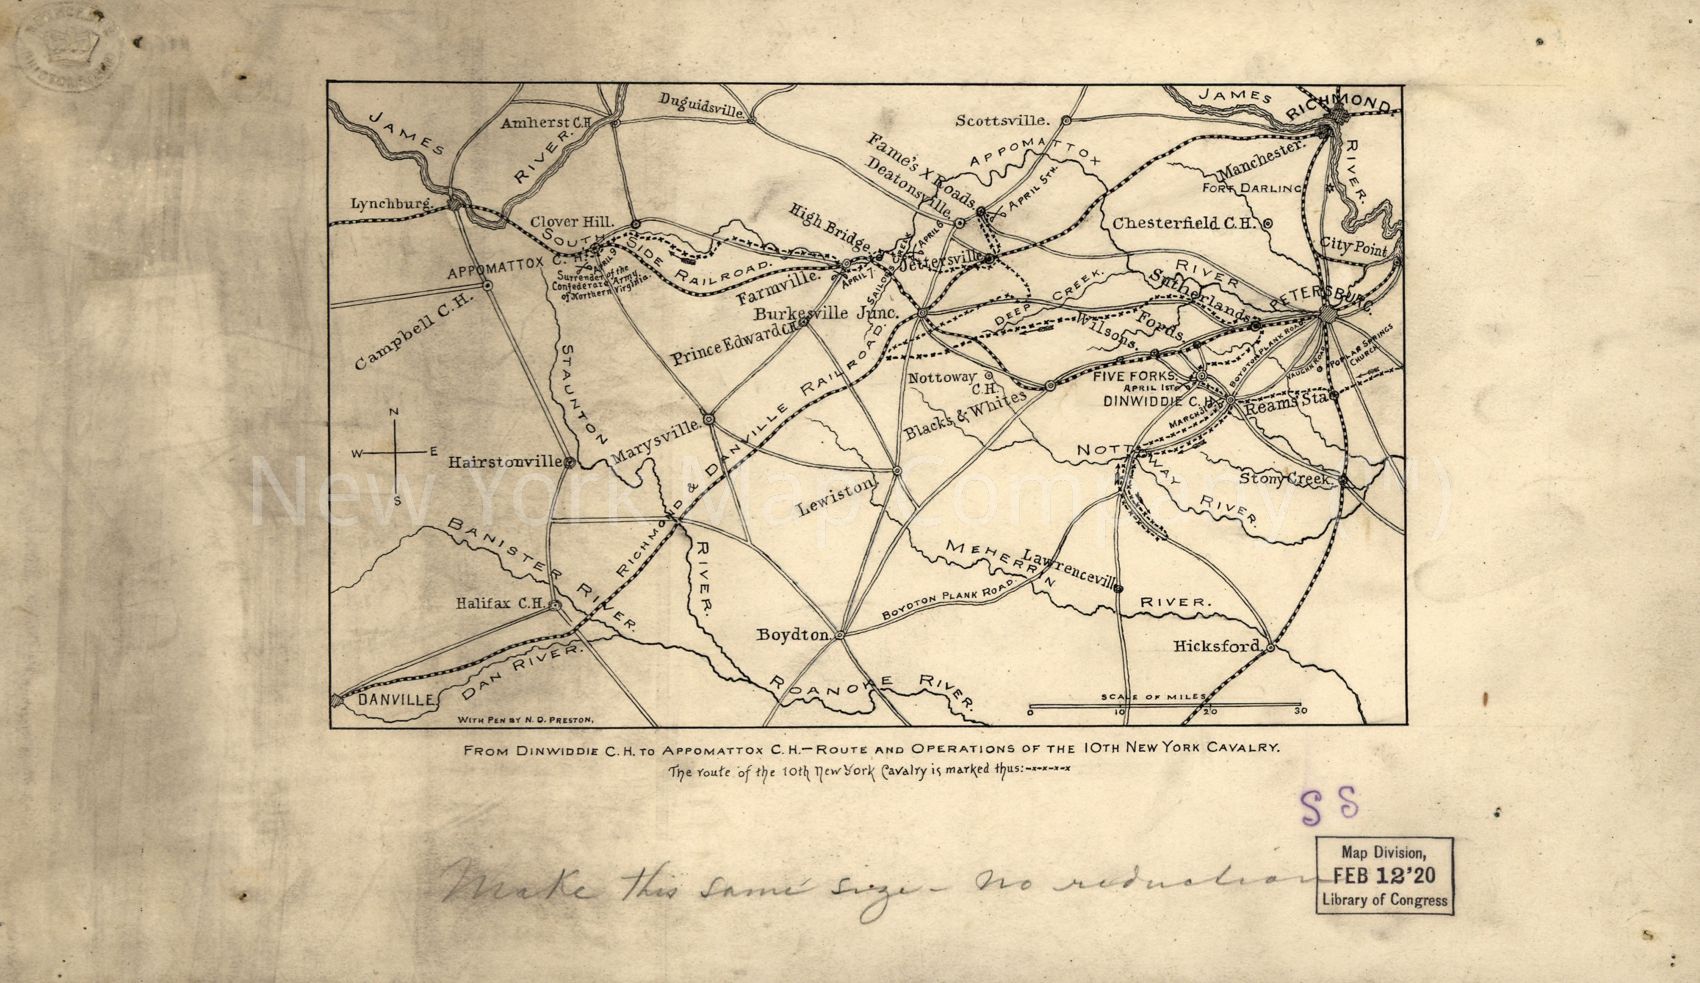 1892 Map| From Dinwiddie C.H. to Appomattox C.H., route and operations ...